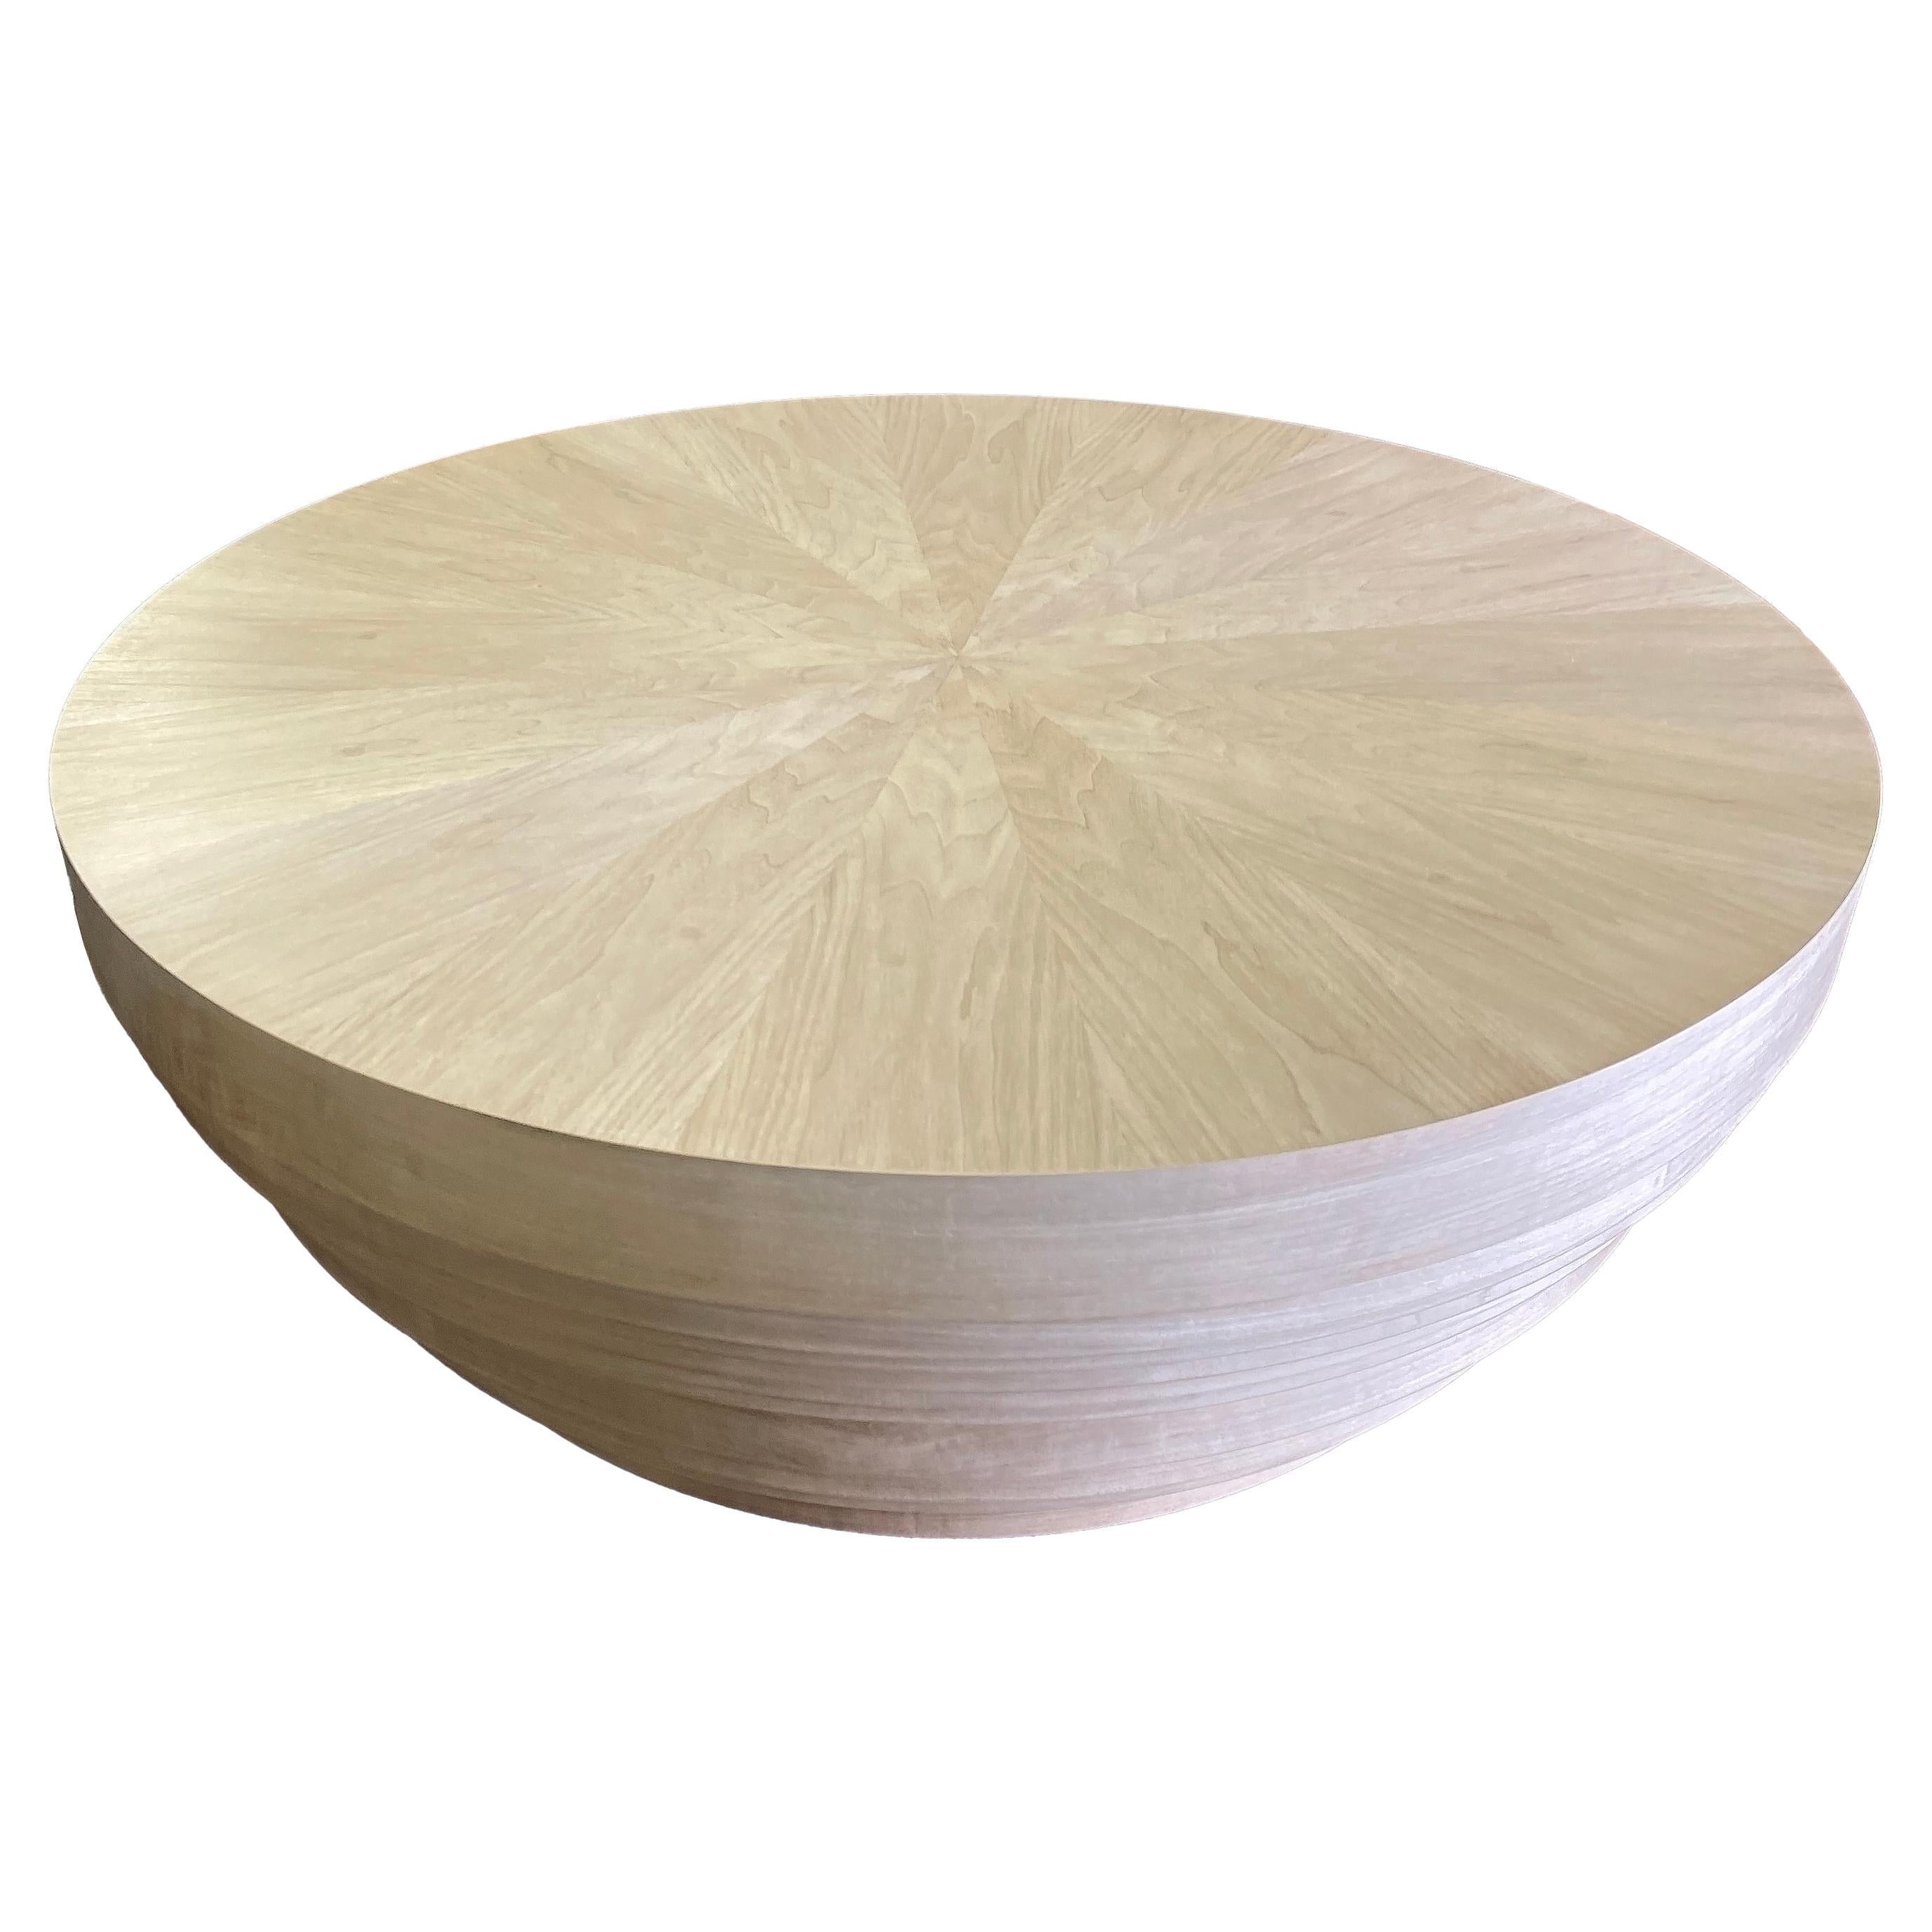 Bleached Walnut Drum Coffee Table